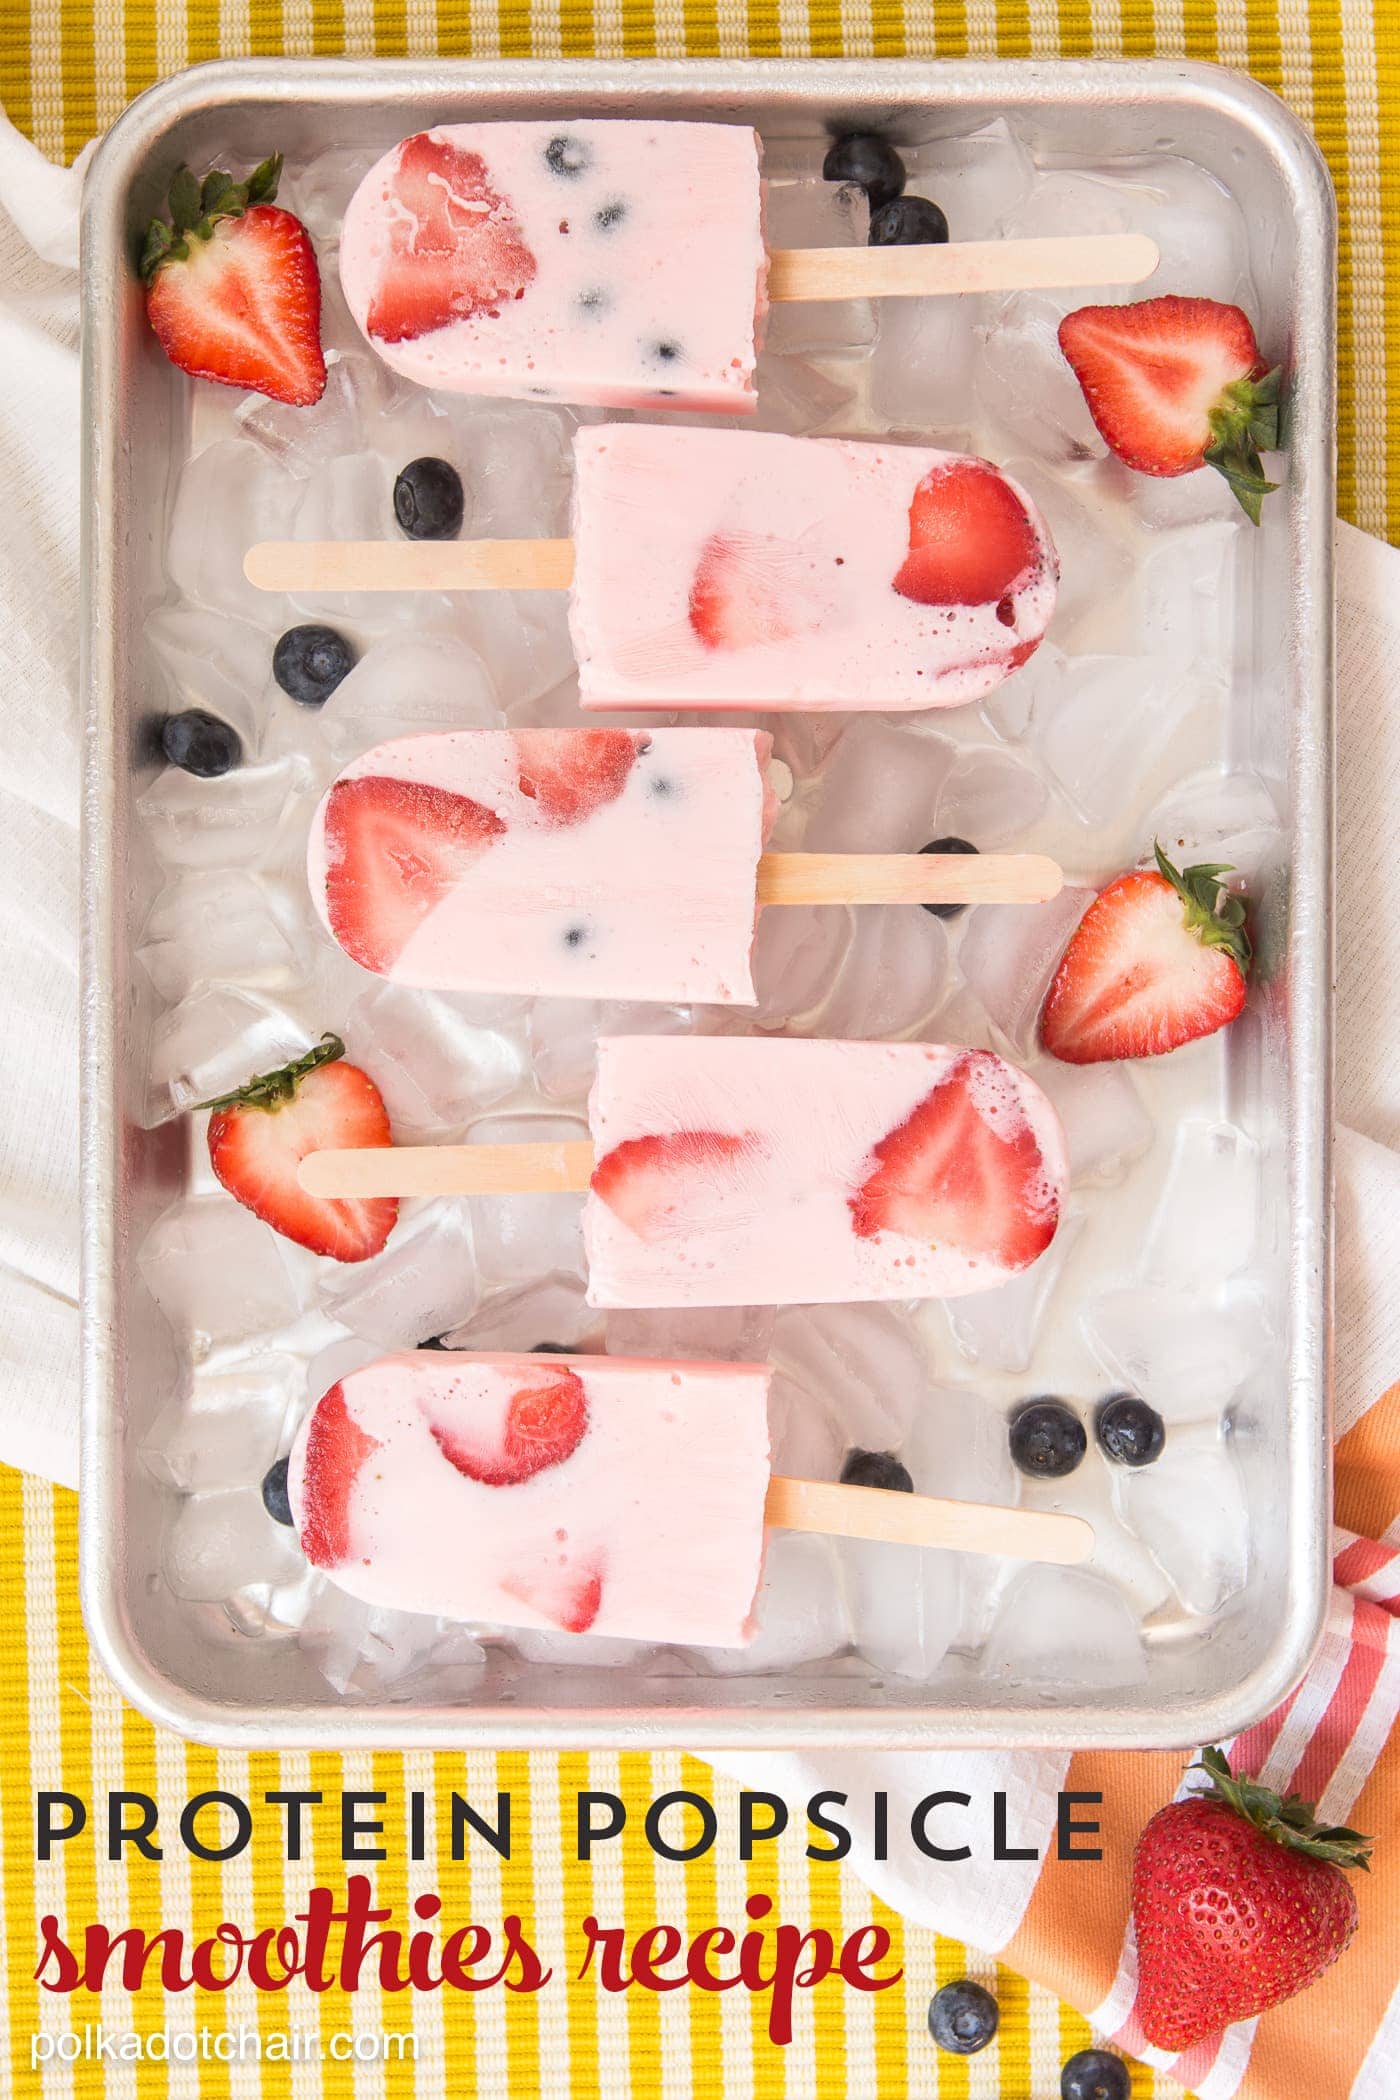 https://www.polkadotchair.com/wp-content/uploads/2015/07/protein-popsicle-smoothies-recipe.jpg